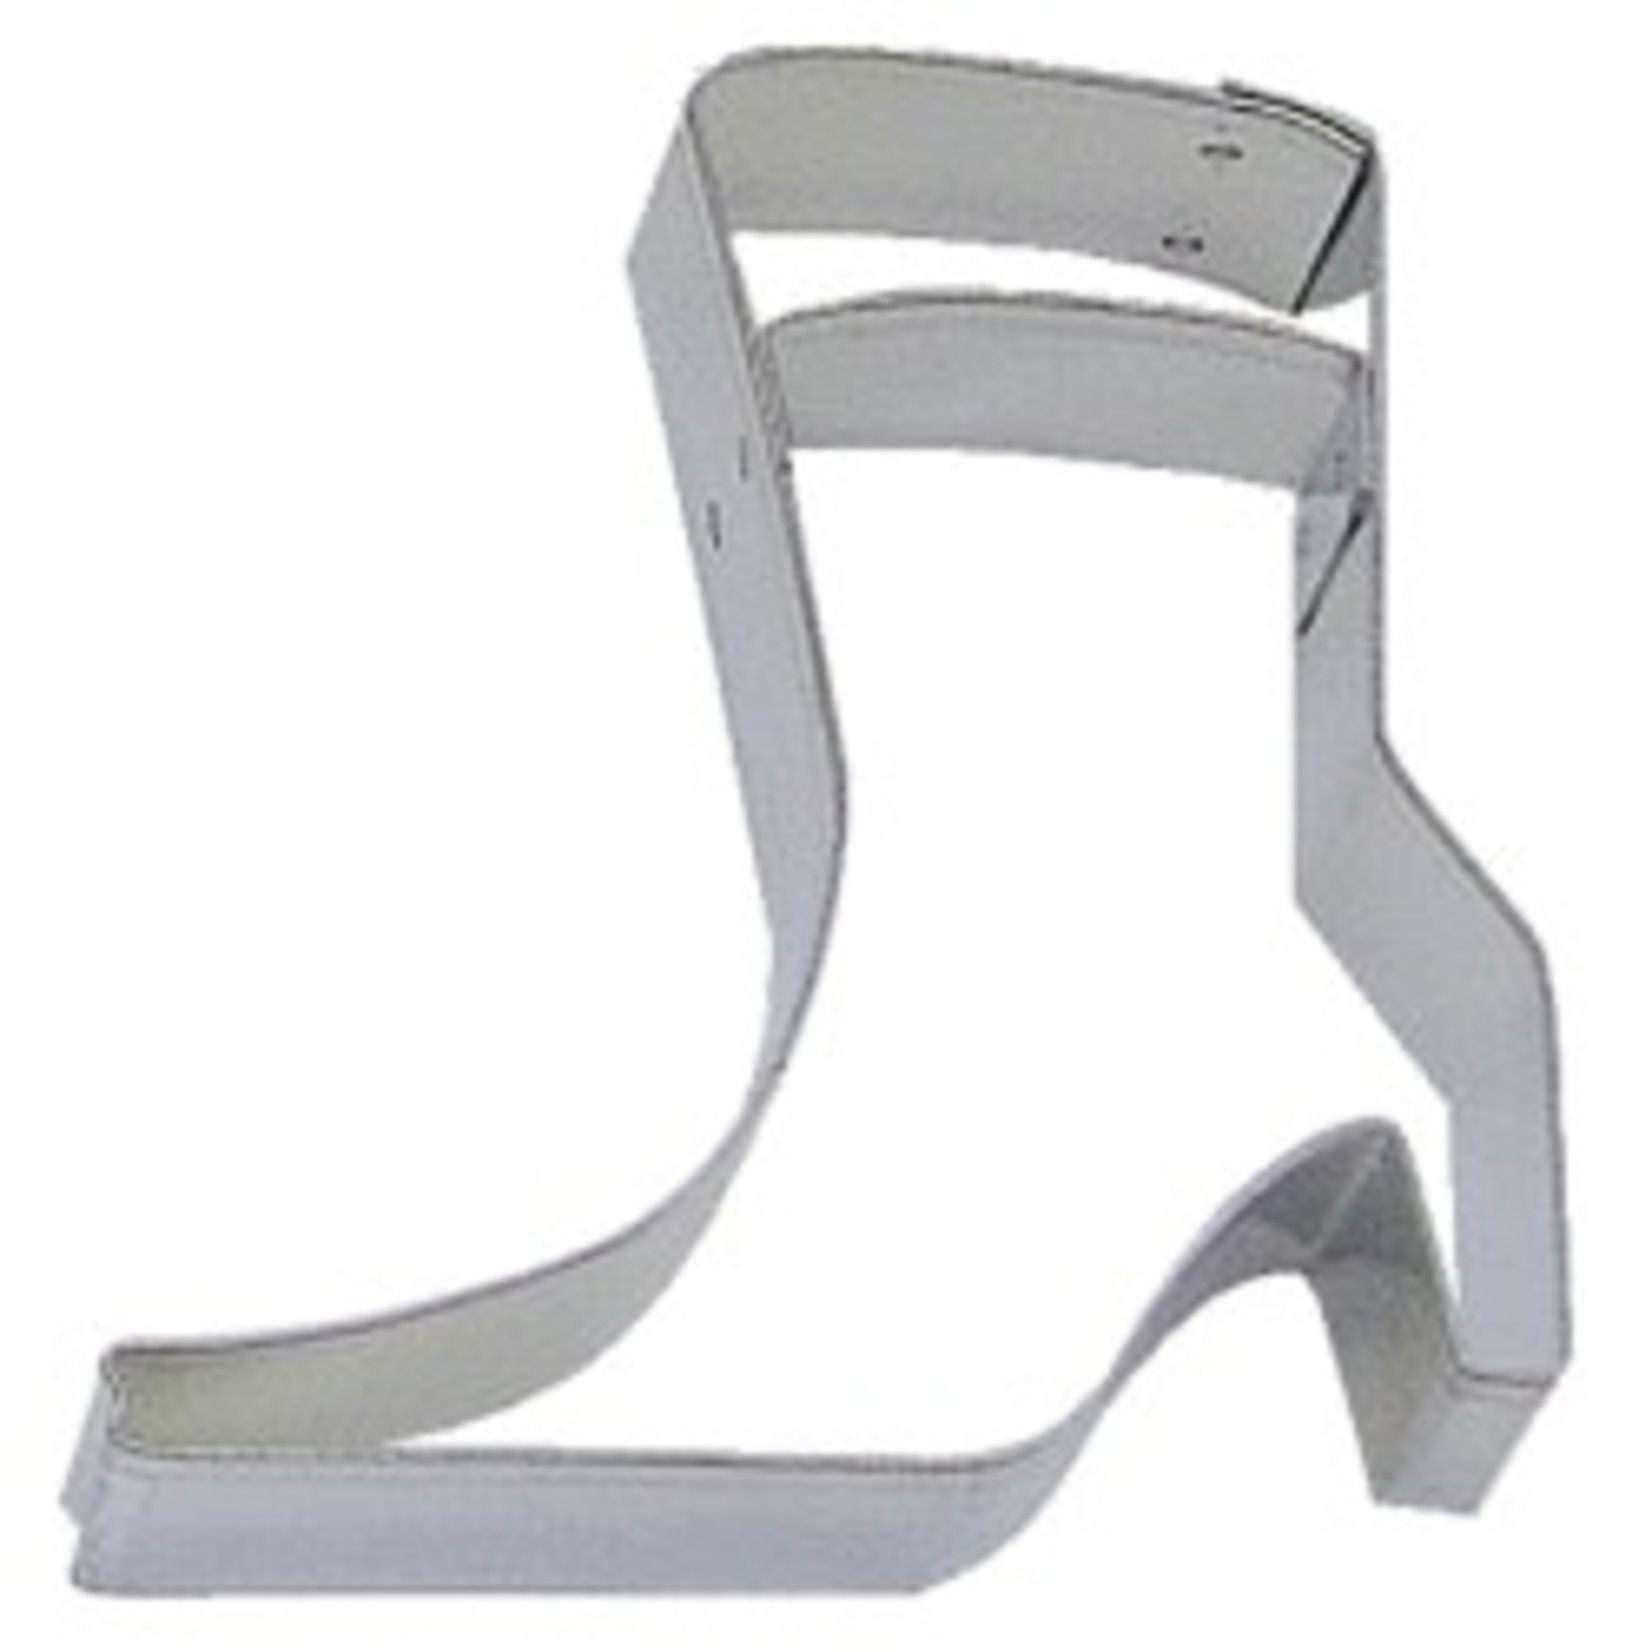 2.5" Boot Cookie Cutter